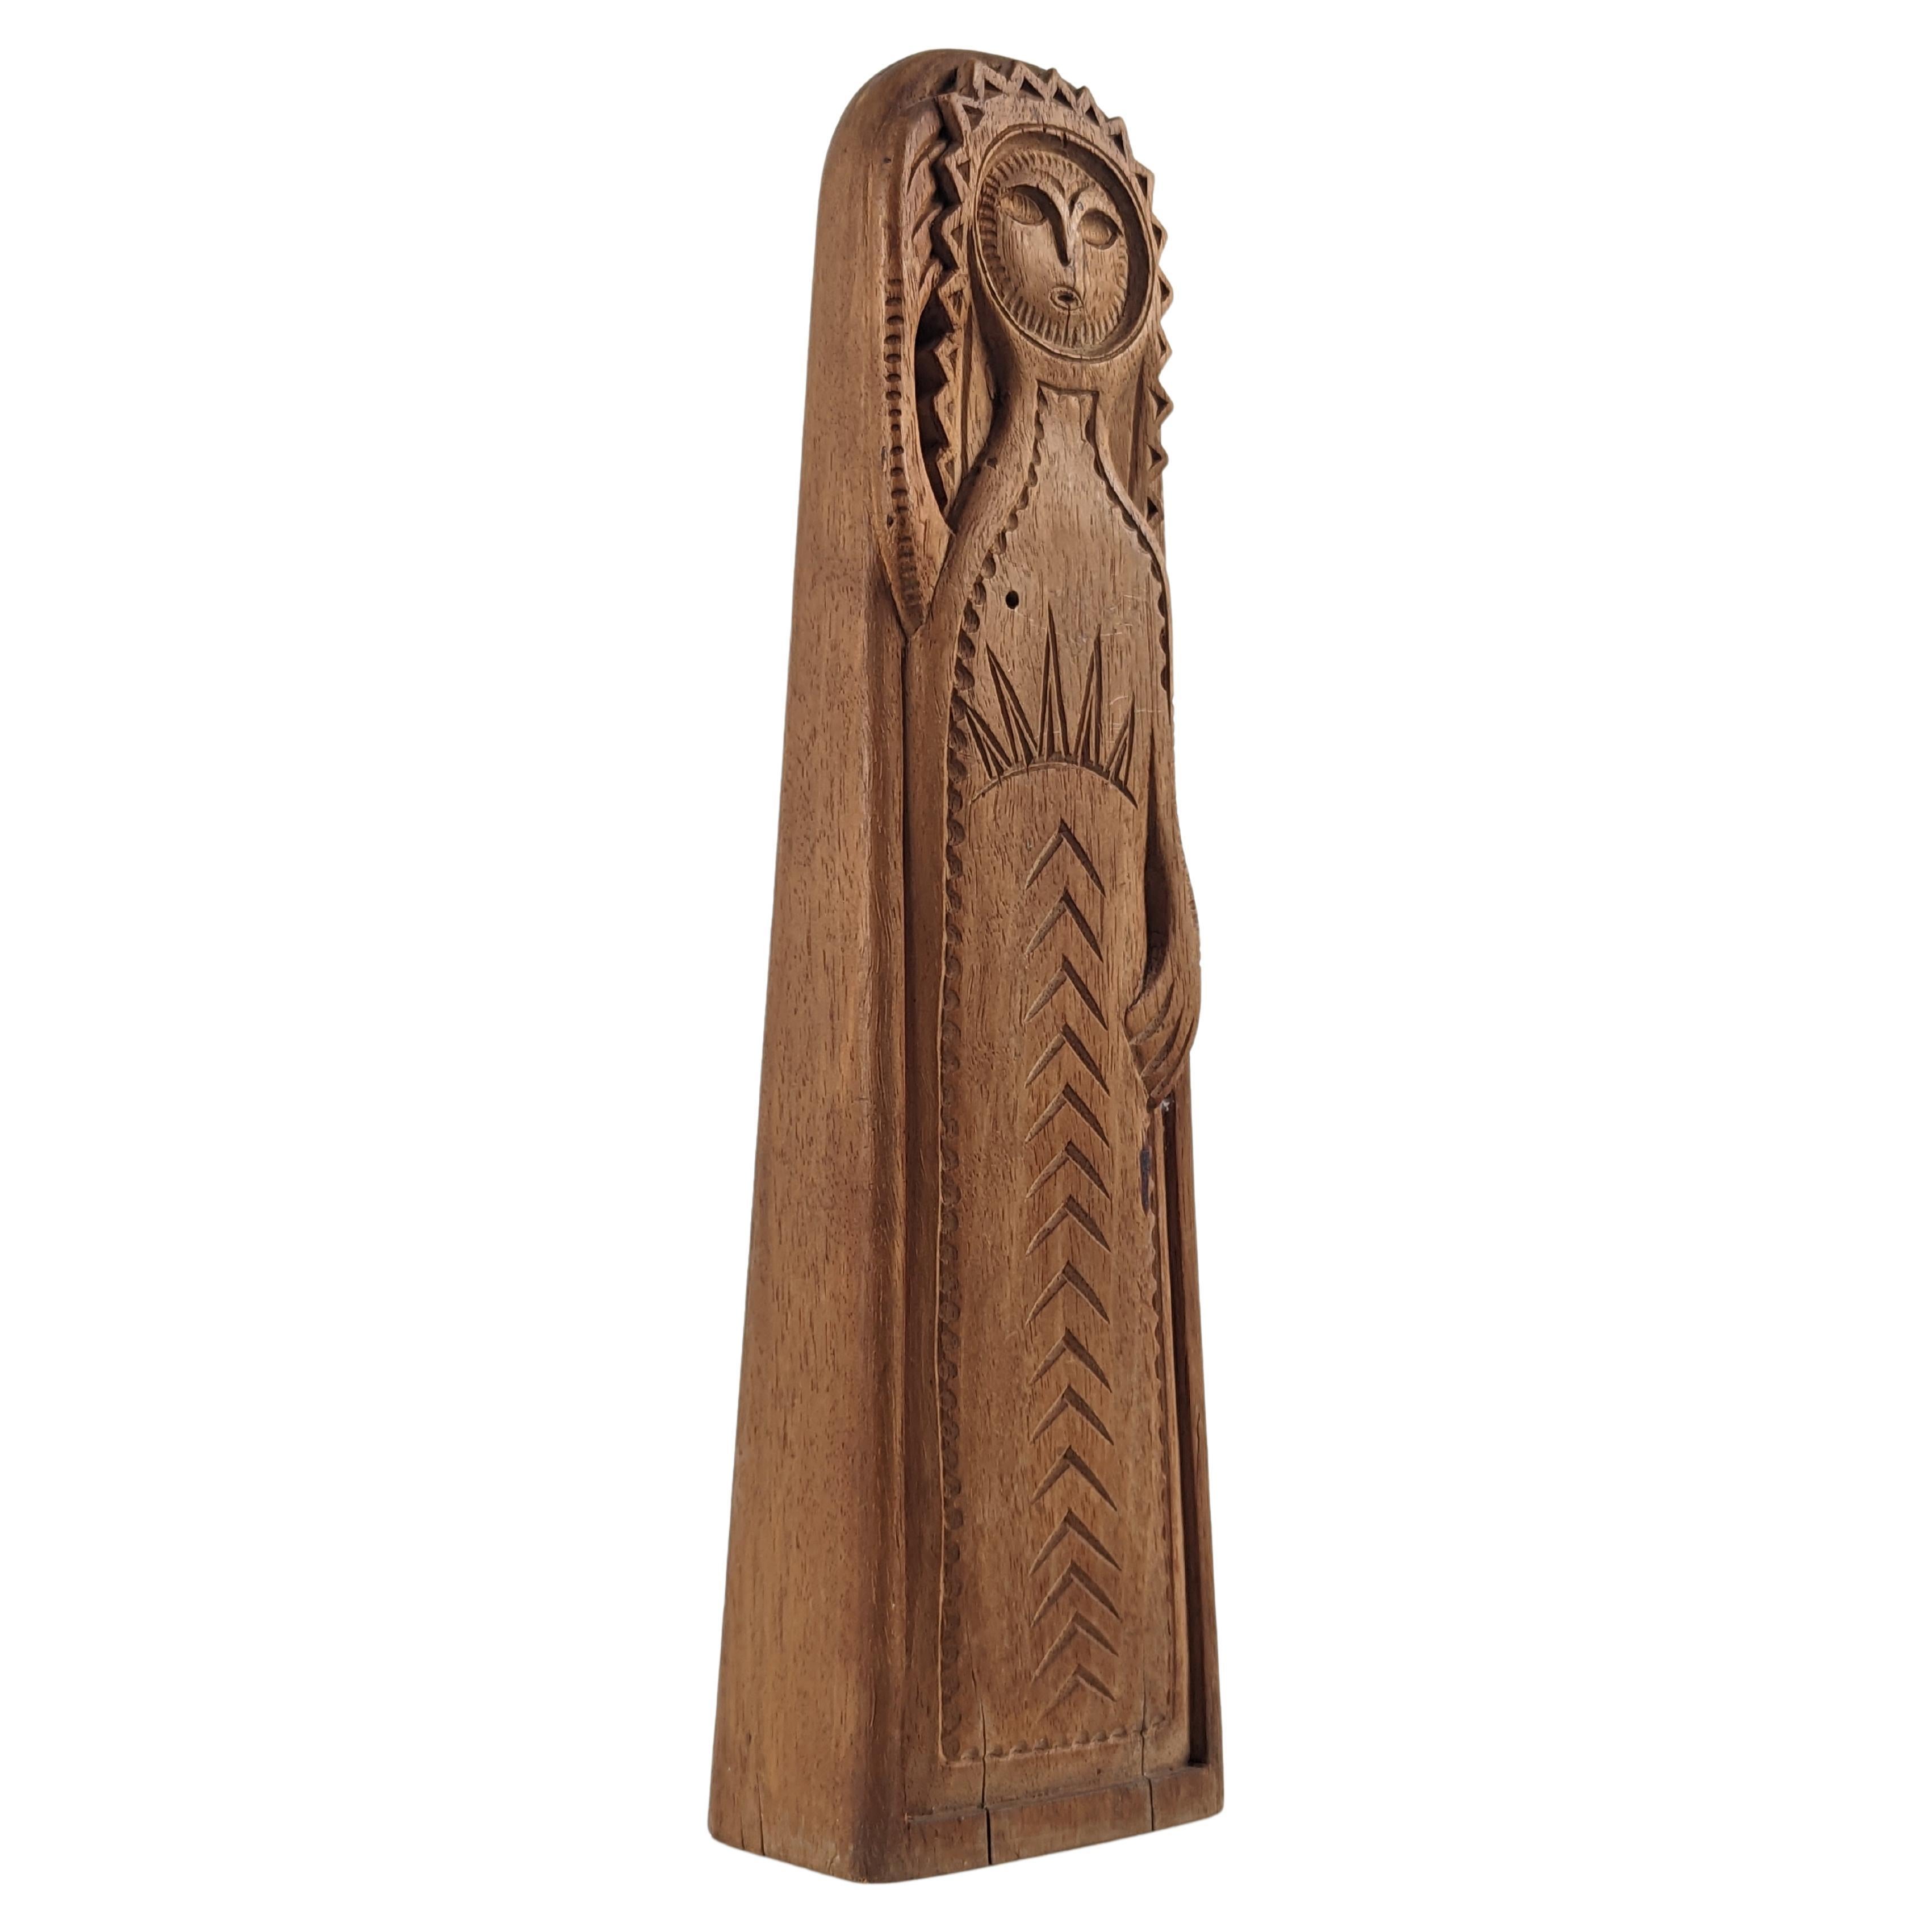 Danish woodcarved sculpture signed For Sale at 1stDibs